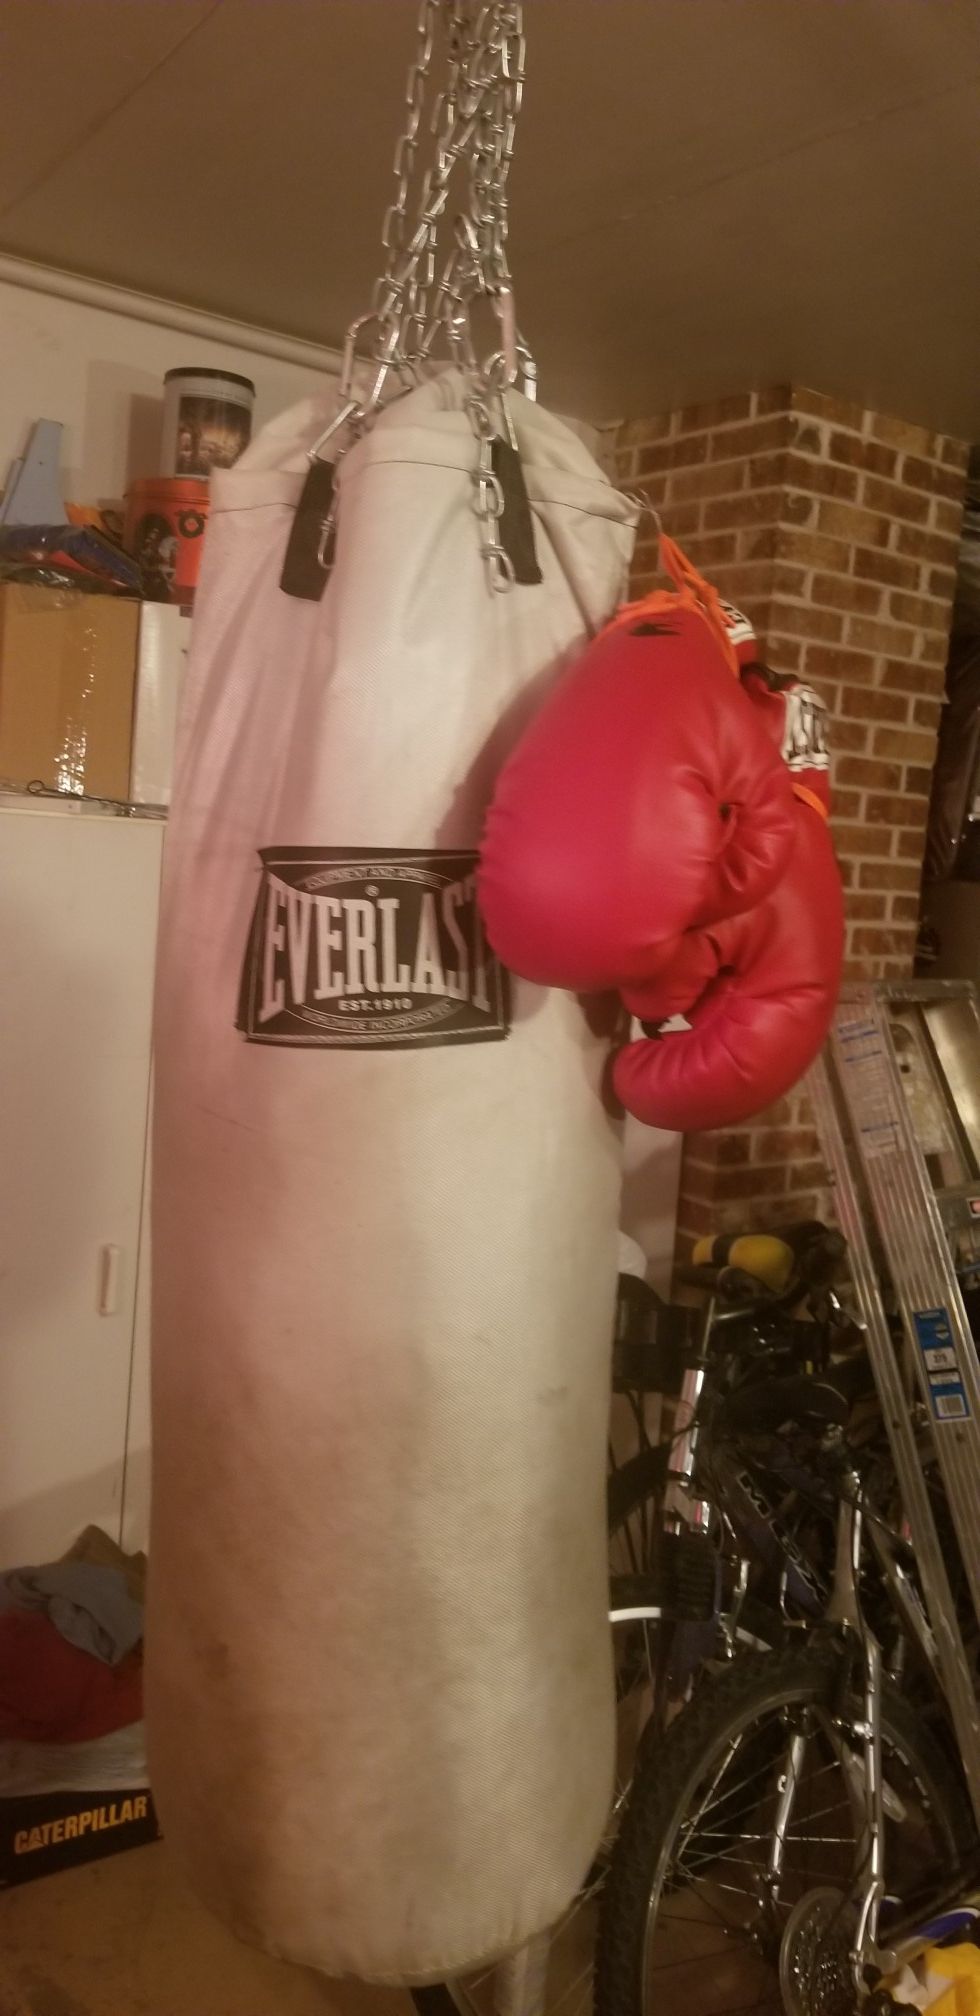 Everlast punching bag with boxing gloves